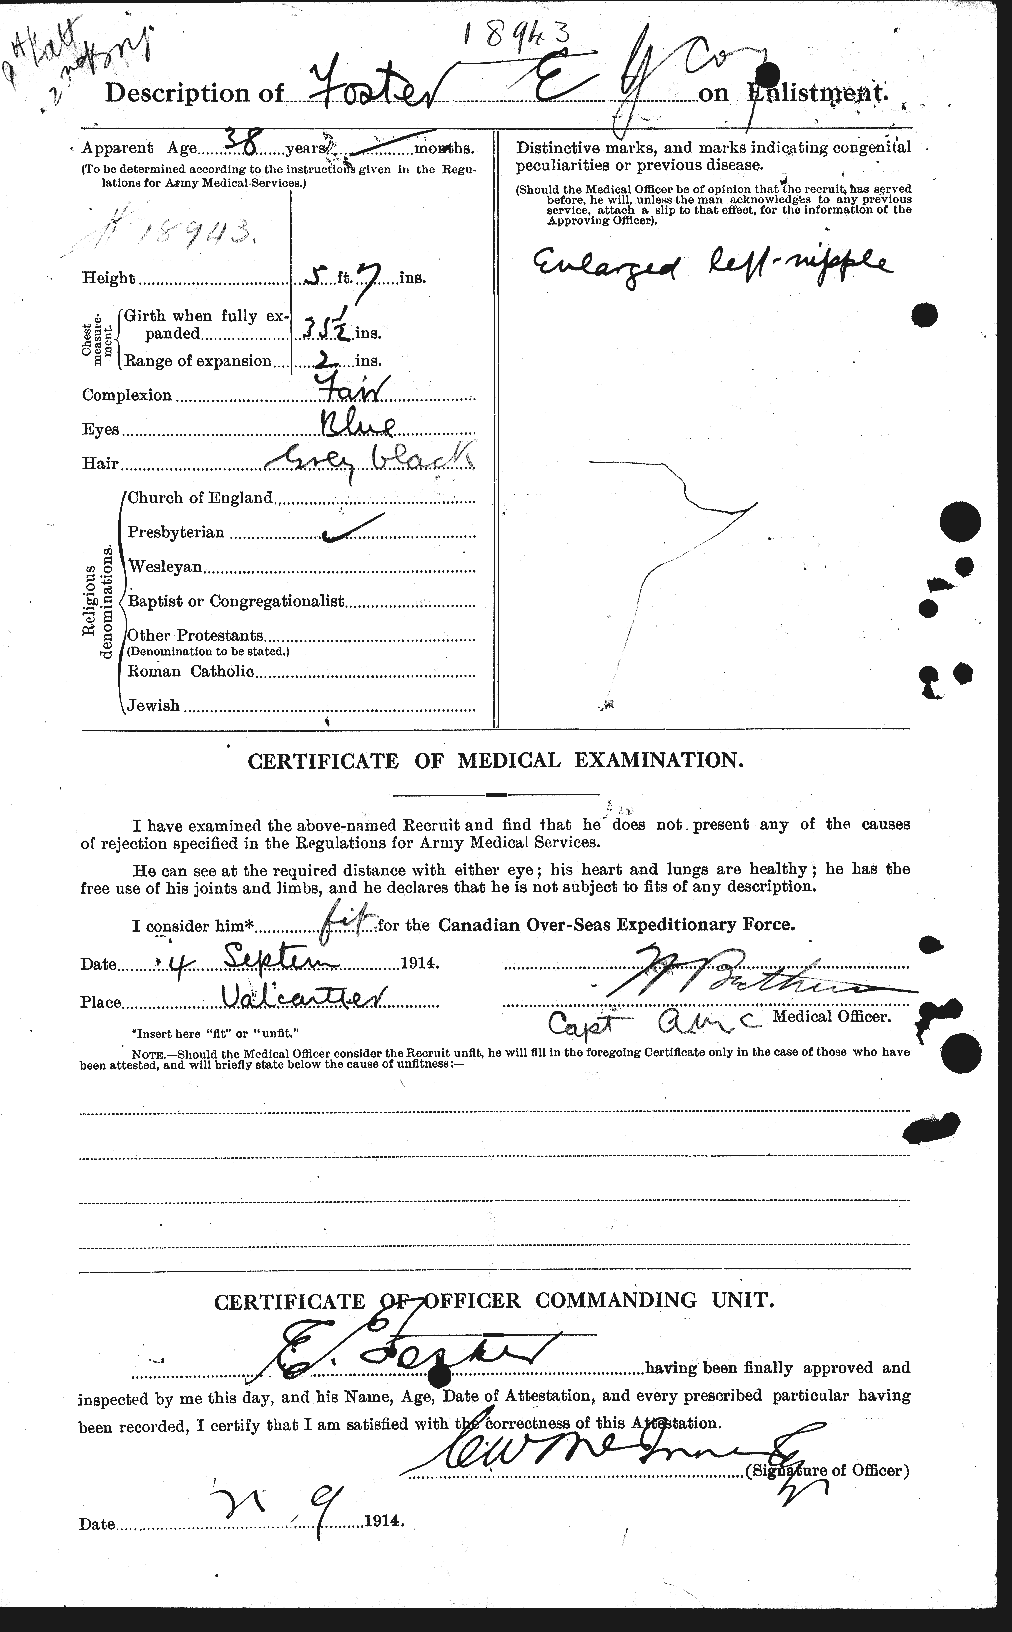 Personnel Records of the First World War - CEF 330600b